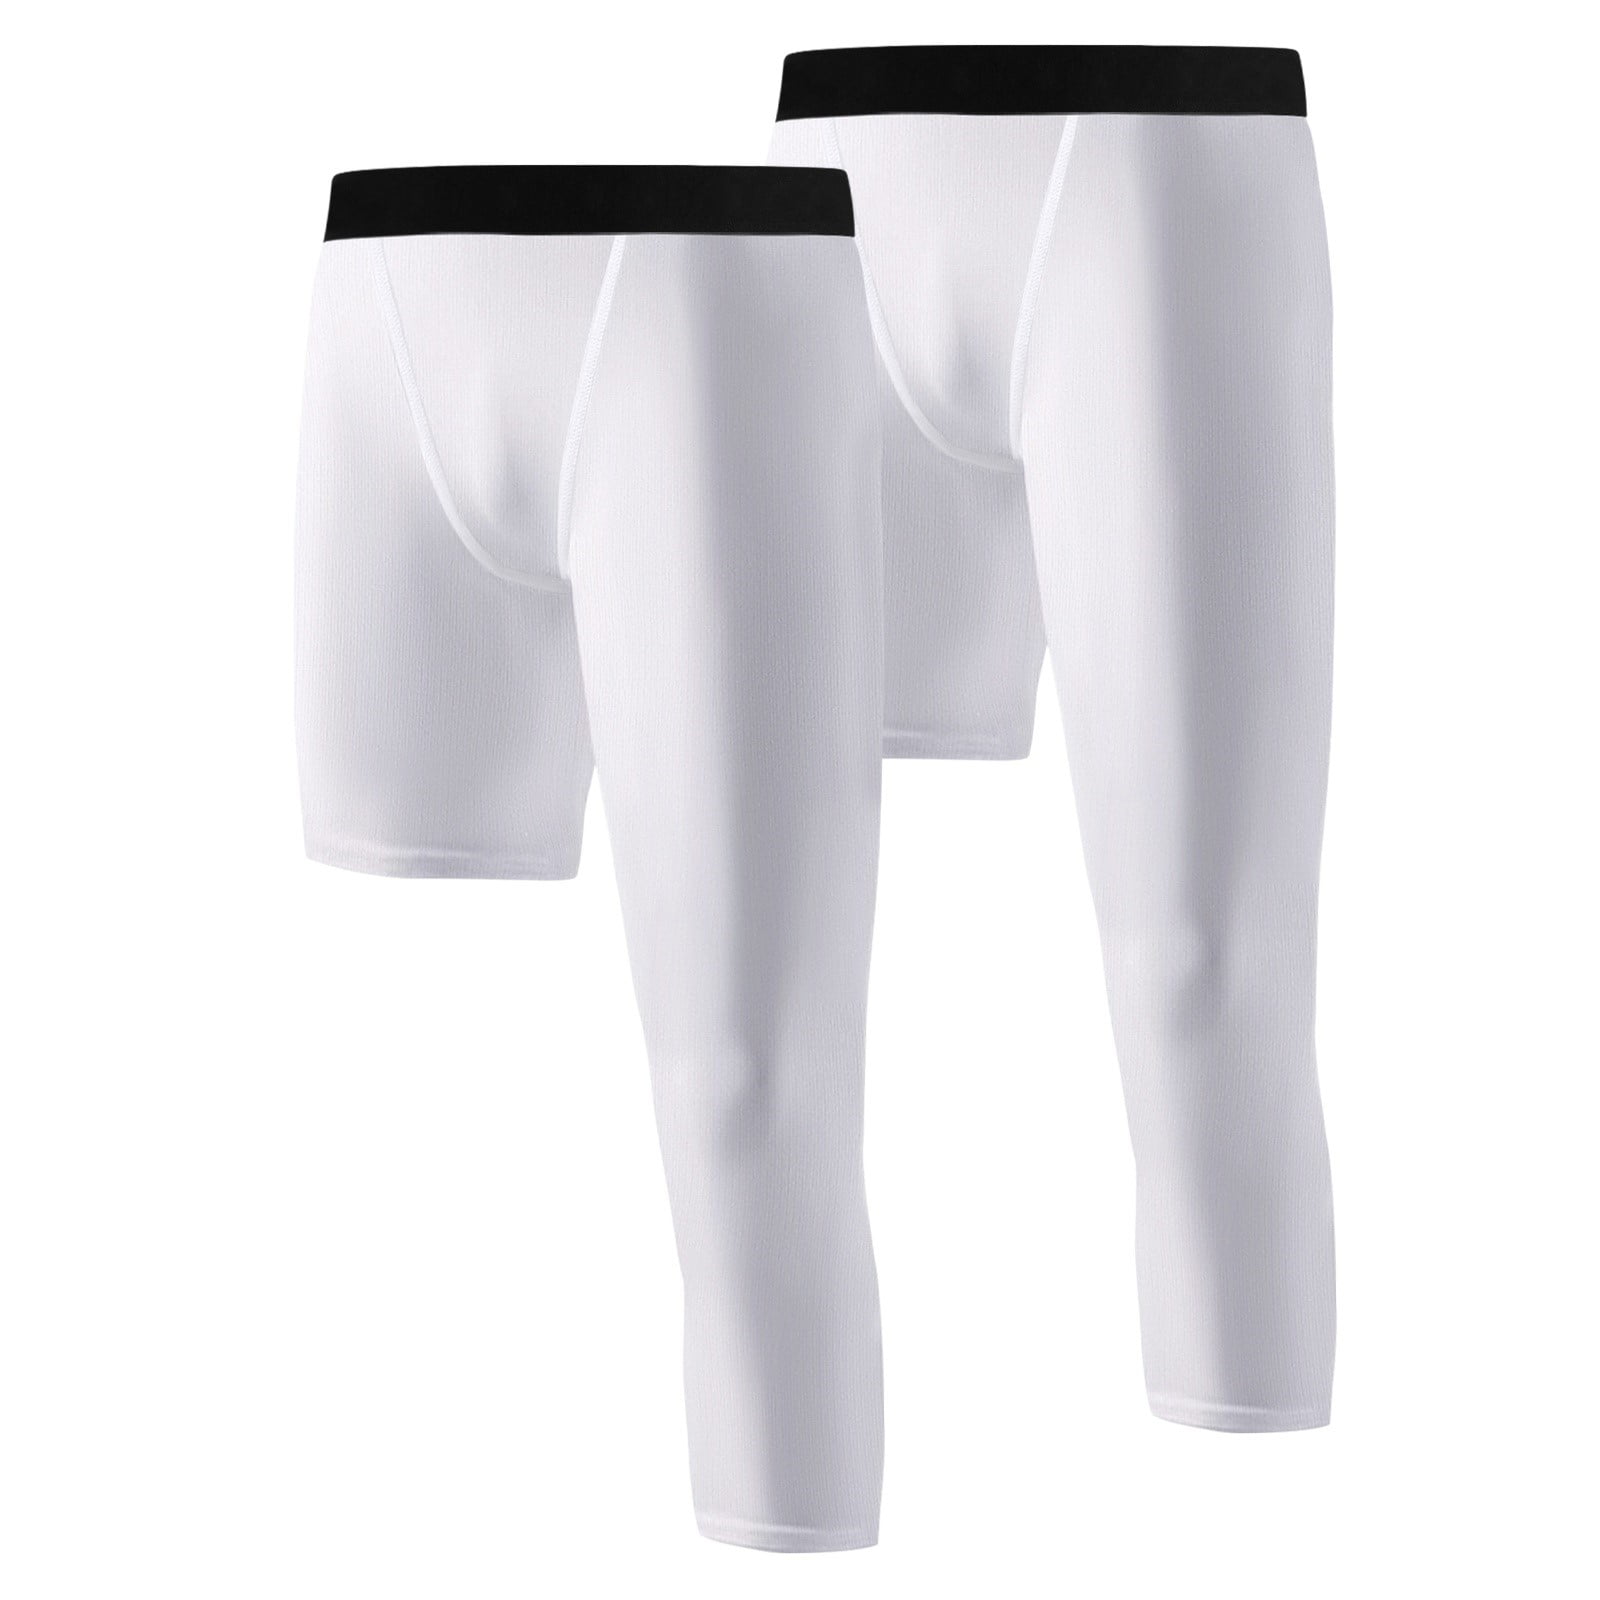 2 Pack Youth Boys Compression Pants One Leg Compression Tights